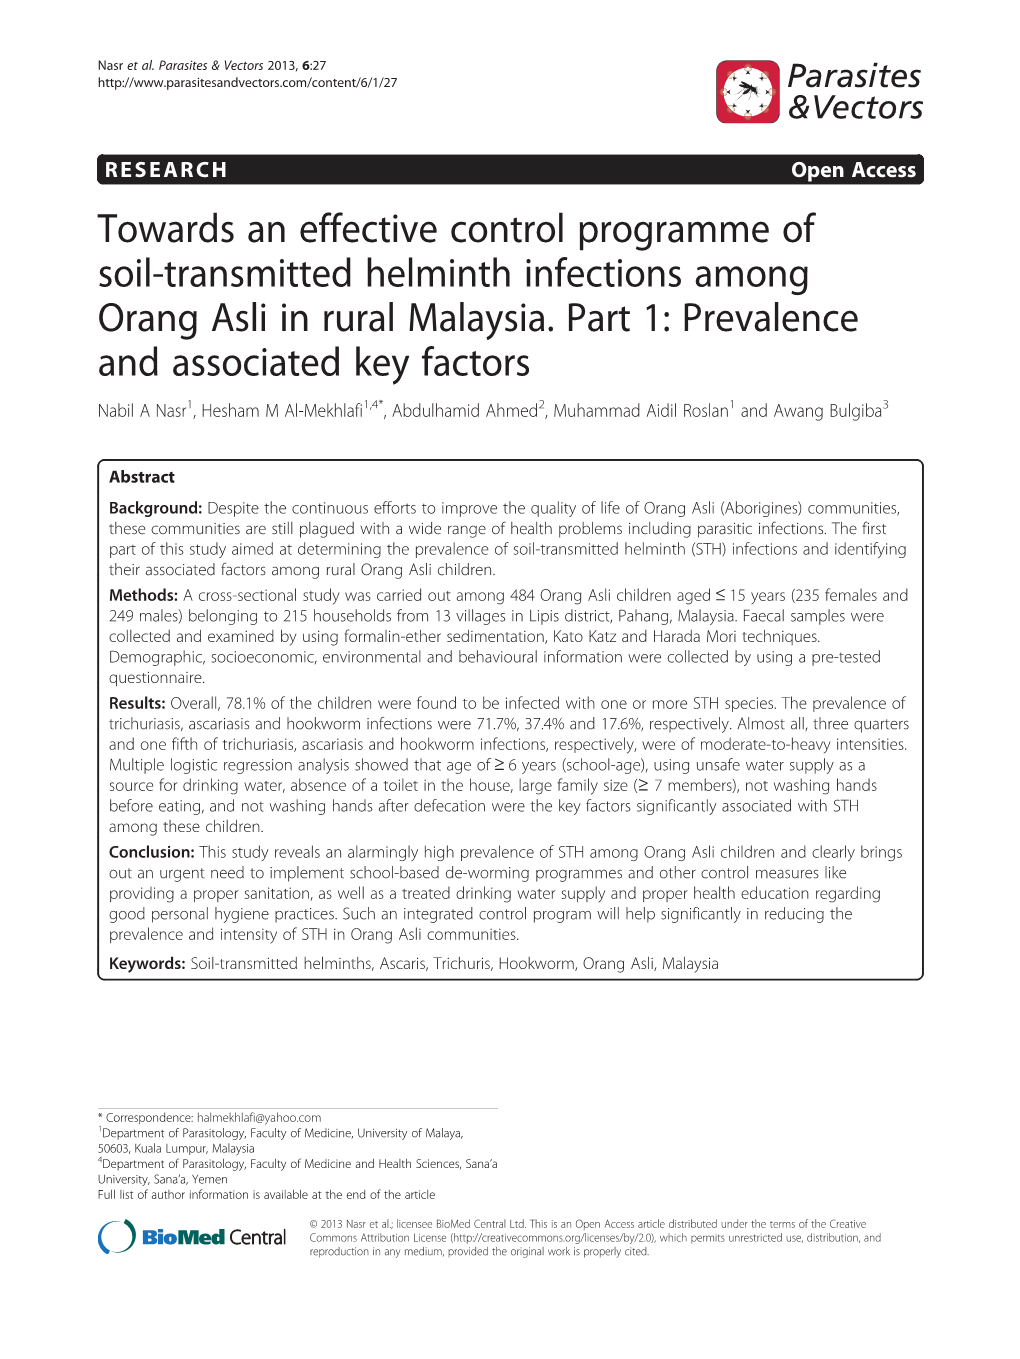 Towards an Effective Control Programme of Soil-Transmitted Helminth Infections Among Orang Asli in Rural Malaysia. Part 1